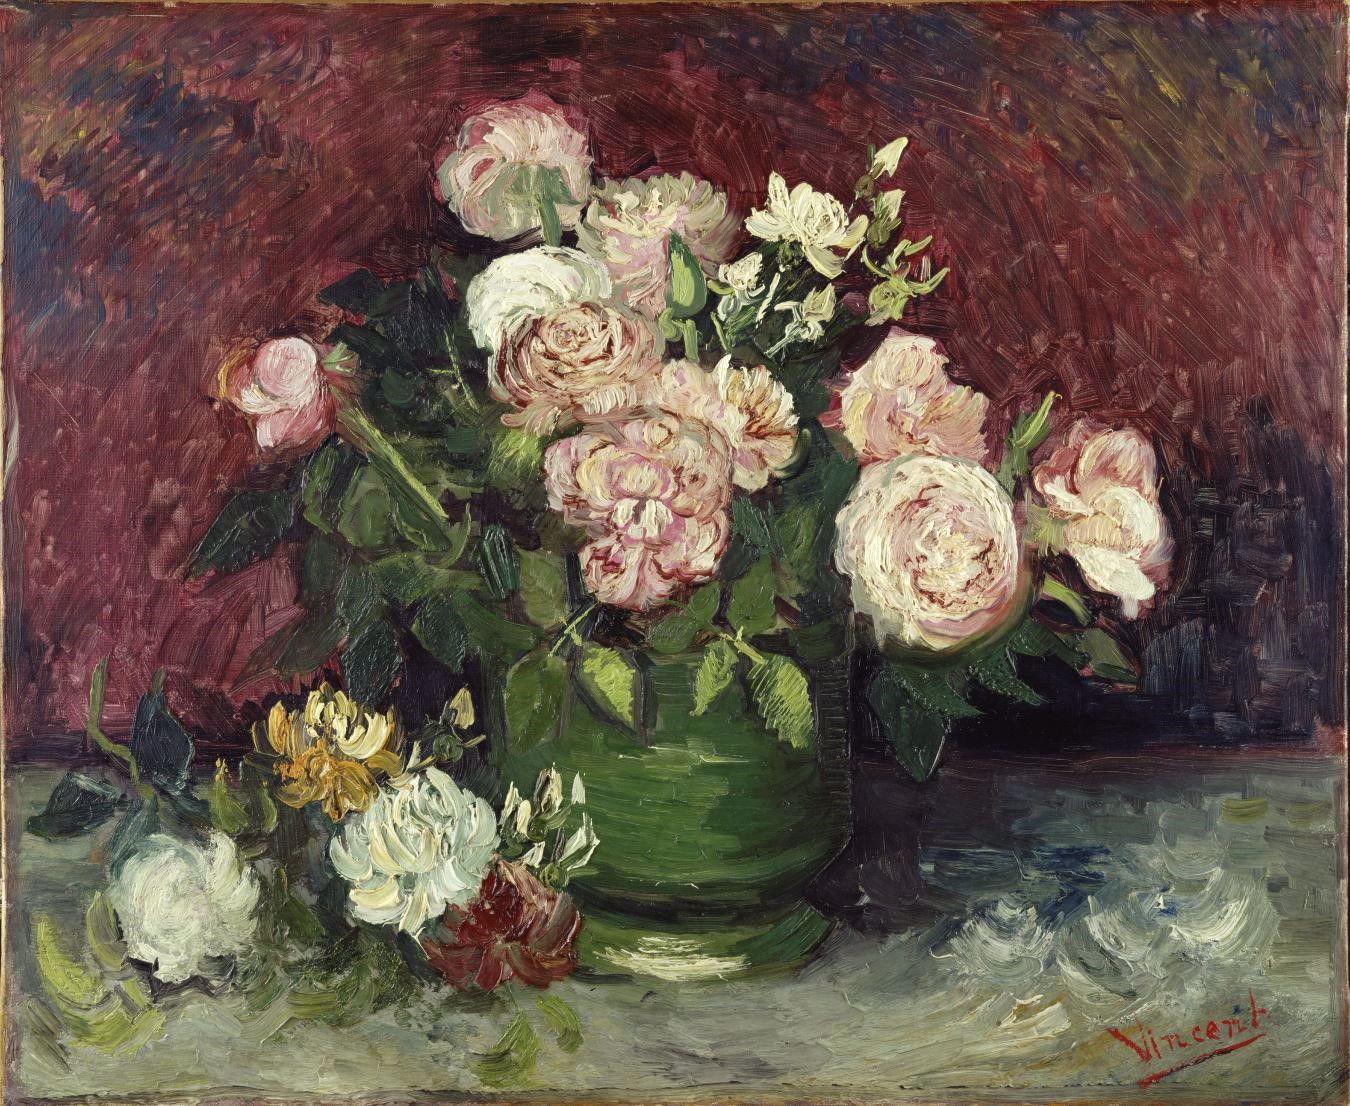 for flowers van gogh blog post only vincent van gogh roses and peonies.16079272252188540622